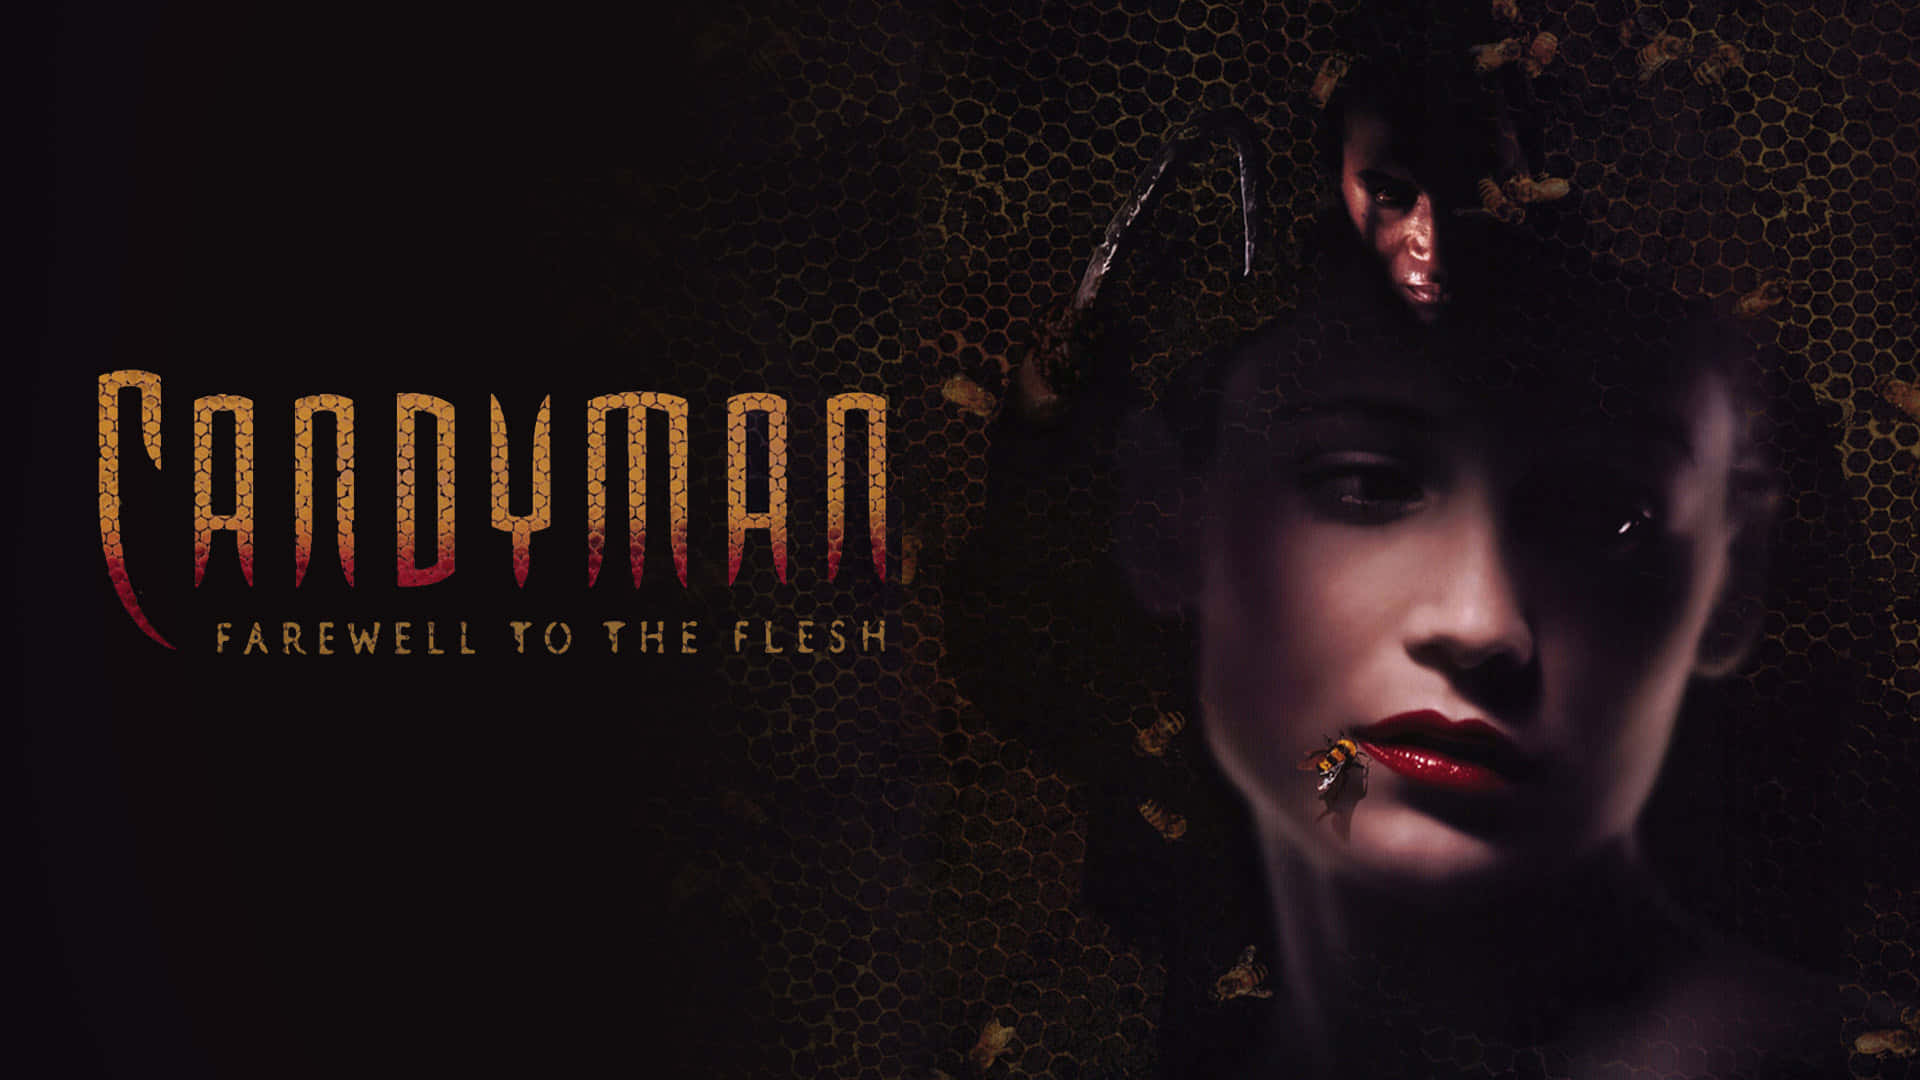 A look into the supernatural behind the famous Candyman